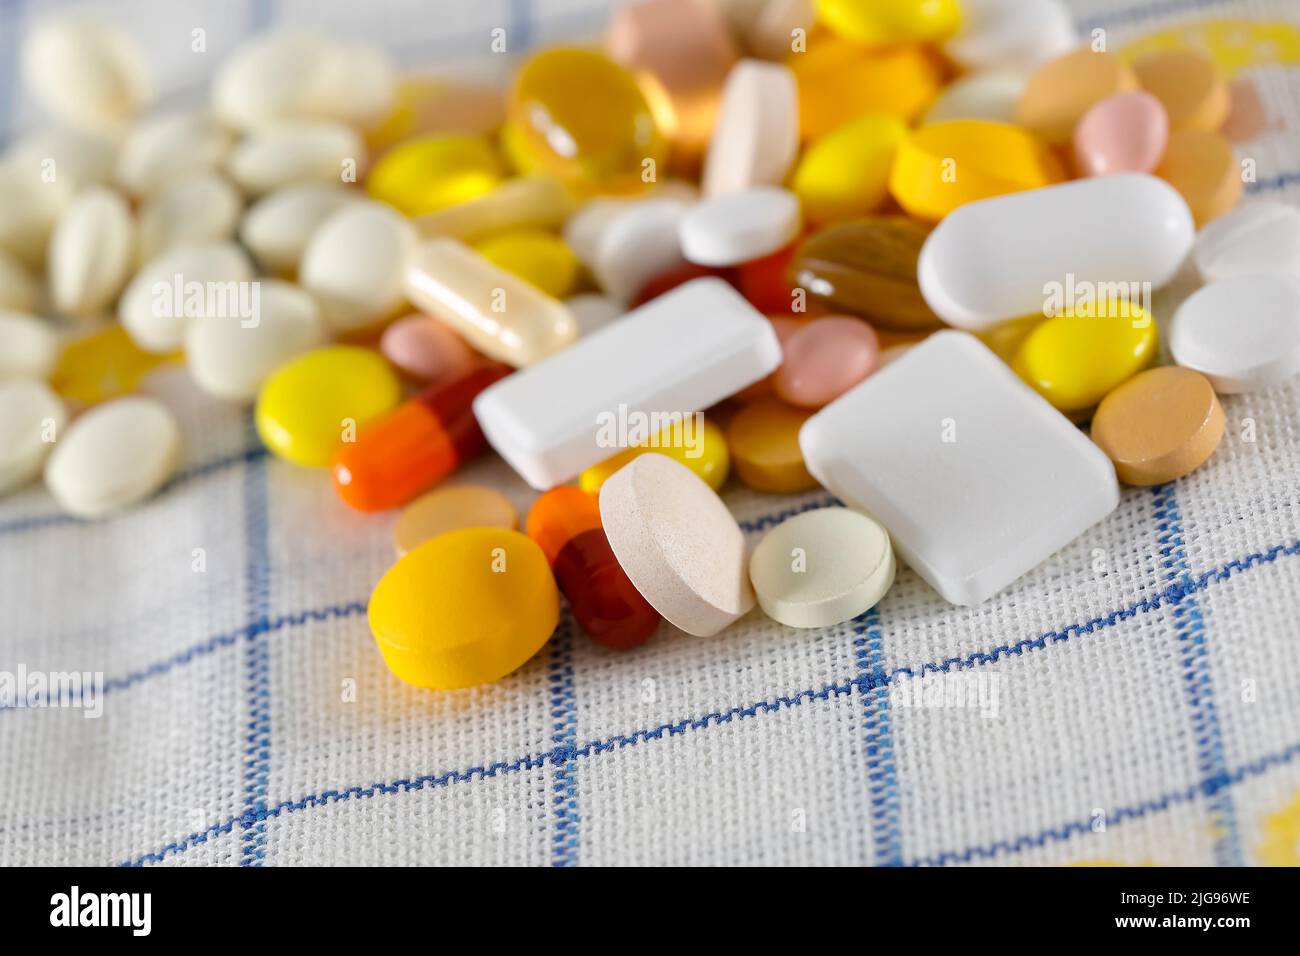 The pills are on the napkin. These varied tablets have various shapes and various colors. Stock Photo